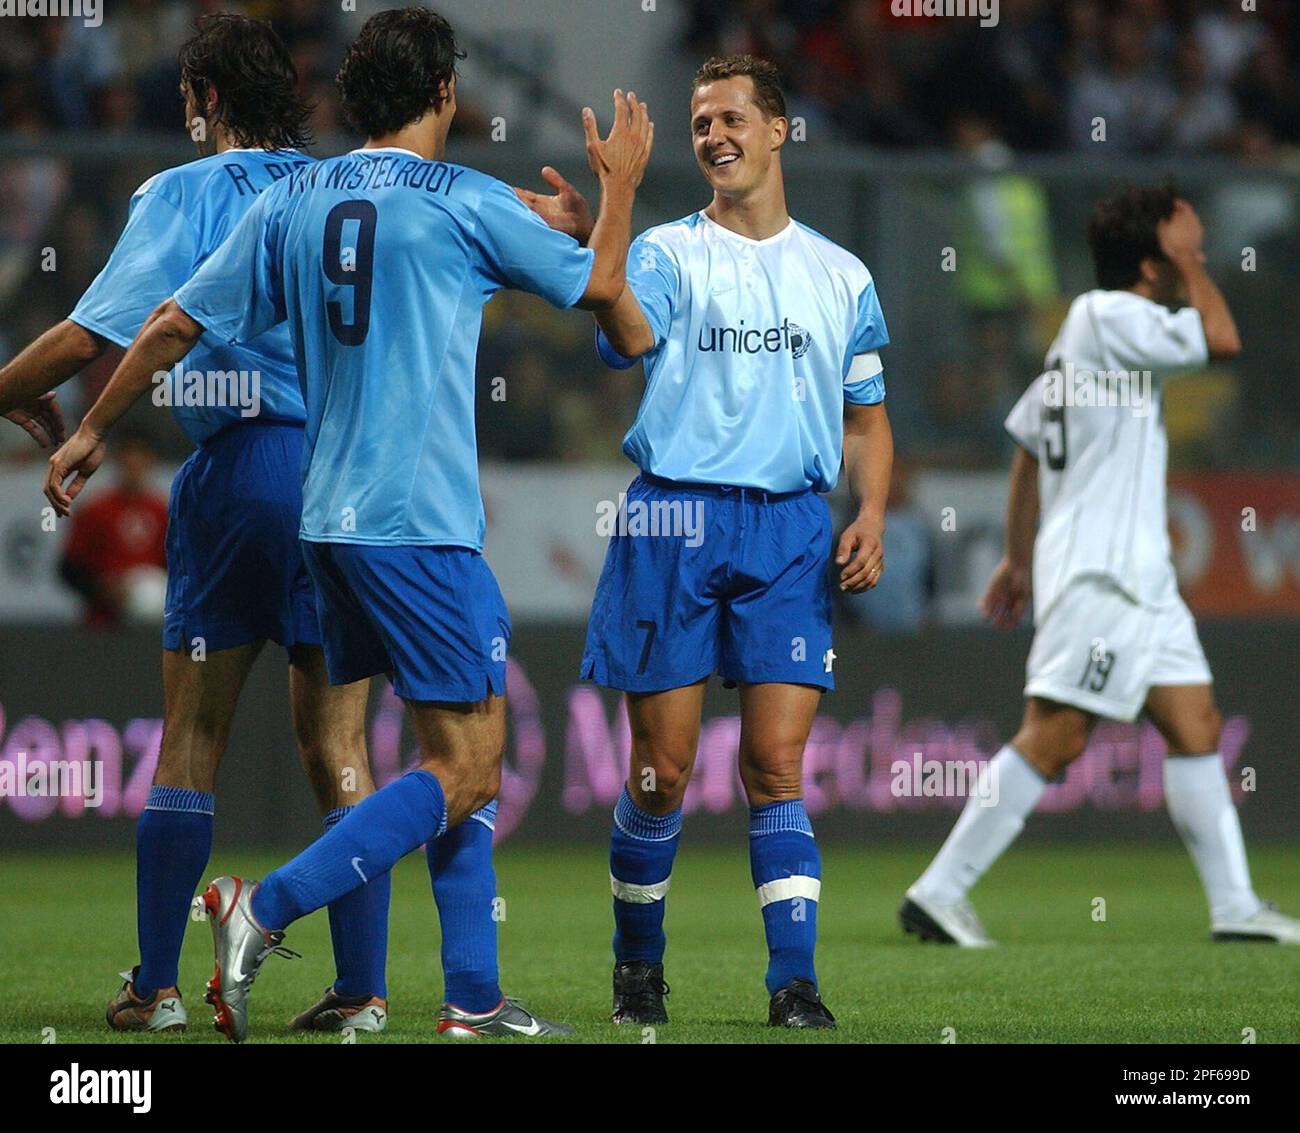 Formula One champion Michael Schumacher, center, celebrates with Dutch  striker Ruud Van Nistelrooy their UNICEF team first goal as FC Porto's Deco  playing for the Luis Figo Foundation team reacts, right, during